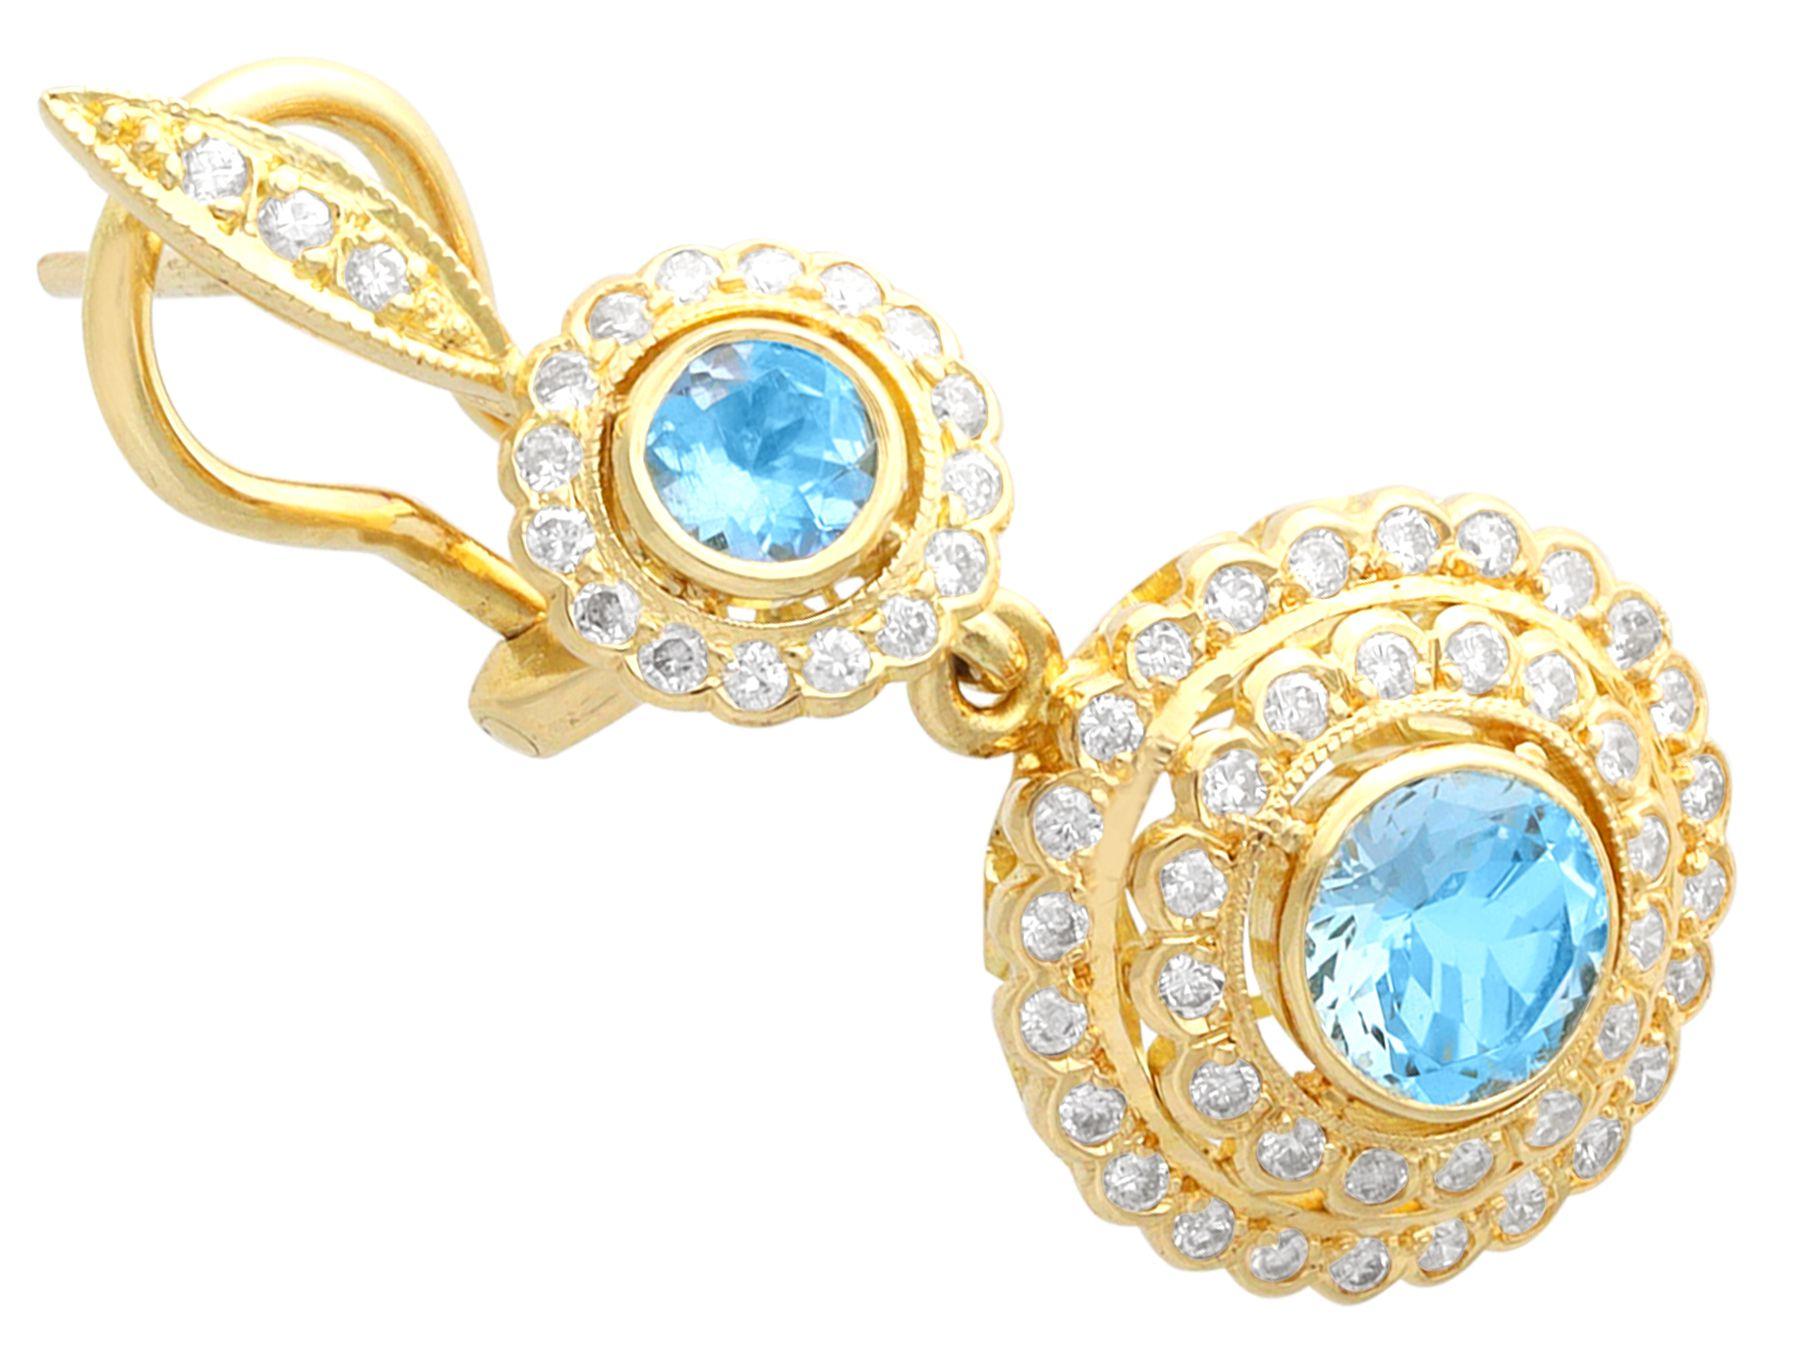 Round Cut Vintage 1.80 Carat Aquamarine and 1.20 Carat Diamond and Yellow Gold Earrings For Sale